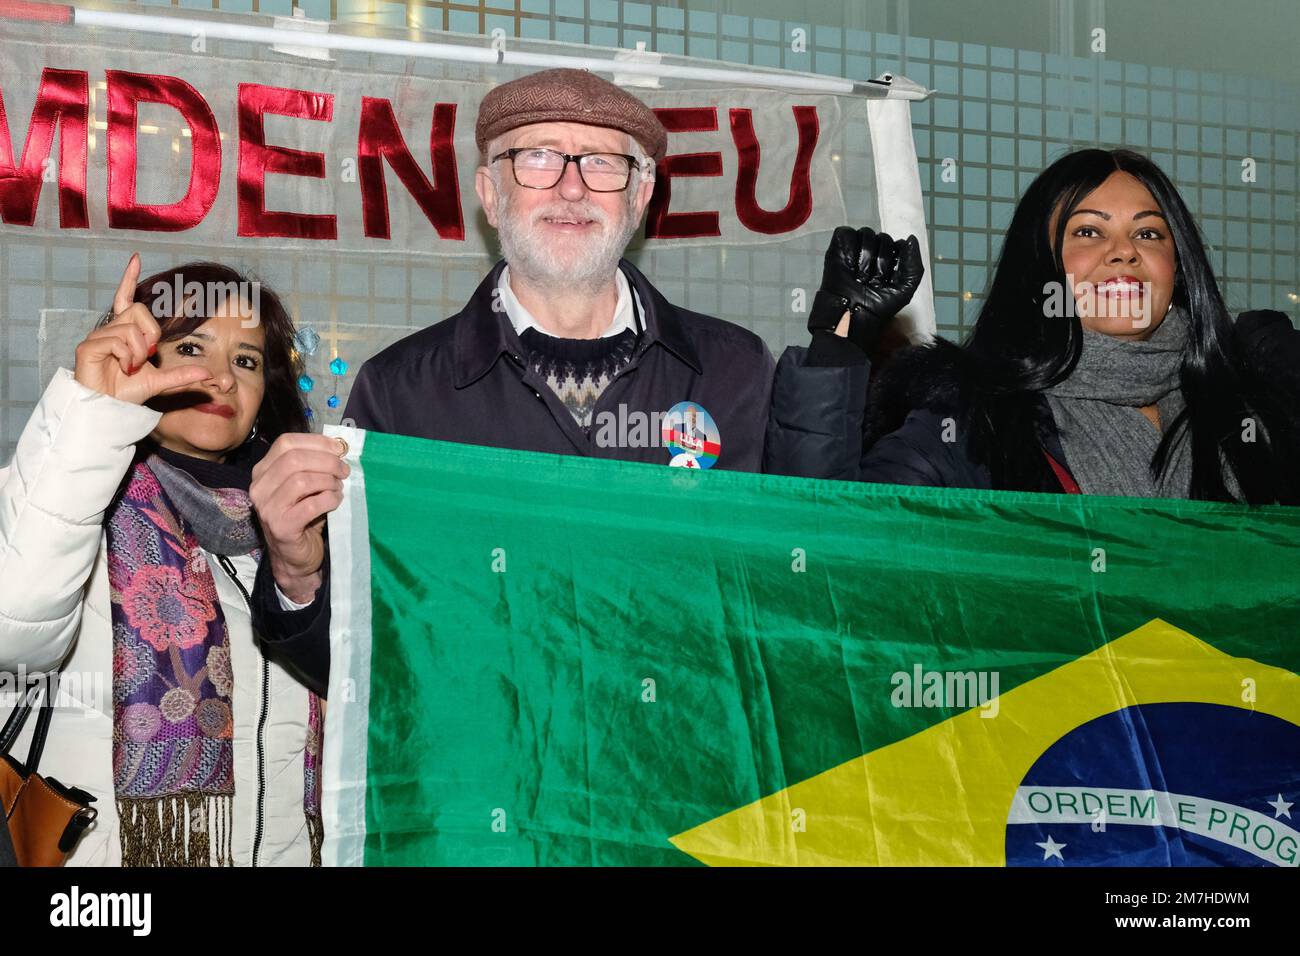 London, UK. 9th January, 2022. MP Jeremy Corbyn speaks at a pro-democracy and anti-racism rally, organised after pro-Bolsonaro supporters rioted in the capital, Brasilia and stormed the Congress building amongst other government offices. In recent weeks rioters camped near military bases with the aim of persuading the military to stage a coup and oust newly inaugarated President Luiz Inacio Lula da Silva from office. Credit: Eleventh Hour Photography/Alamy Live News Stock Photo